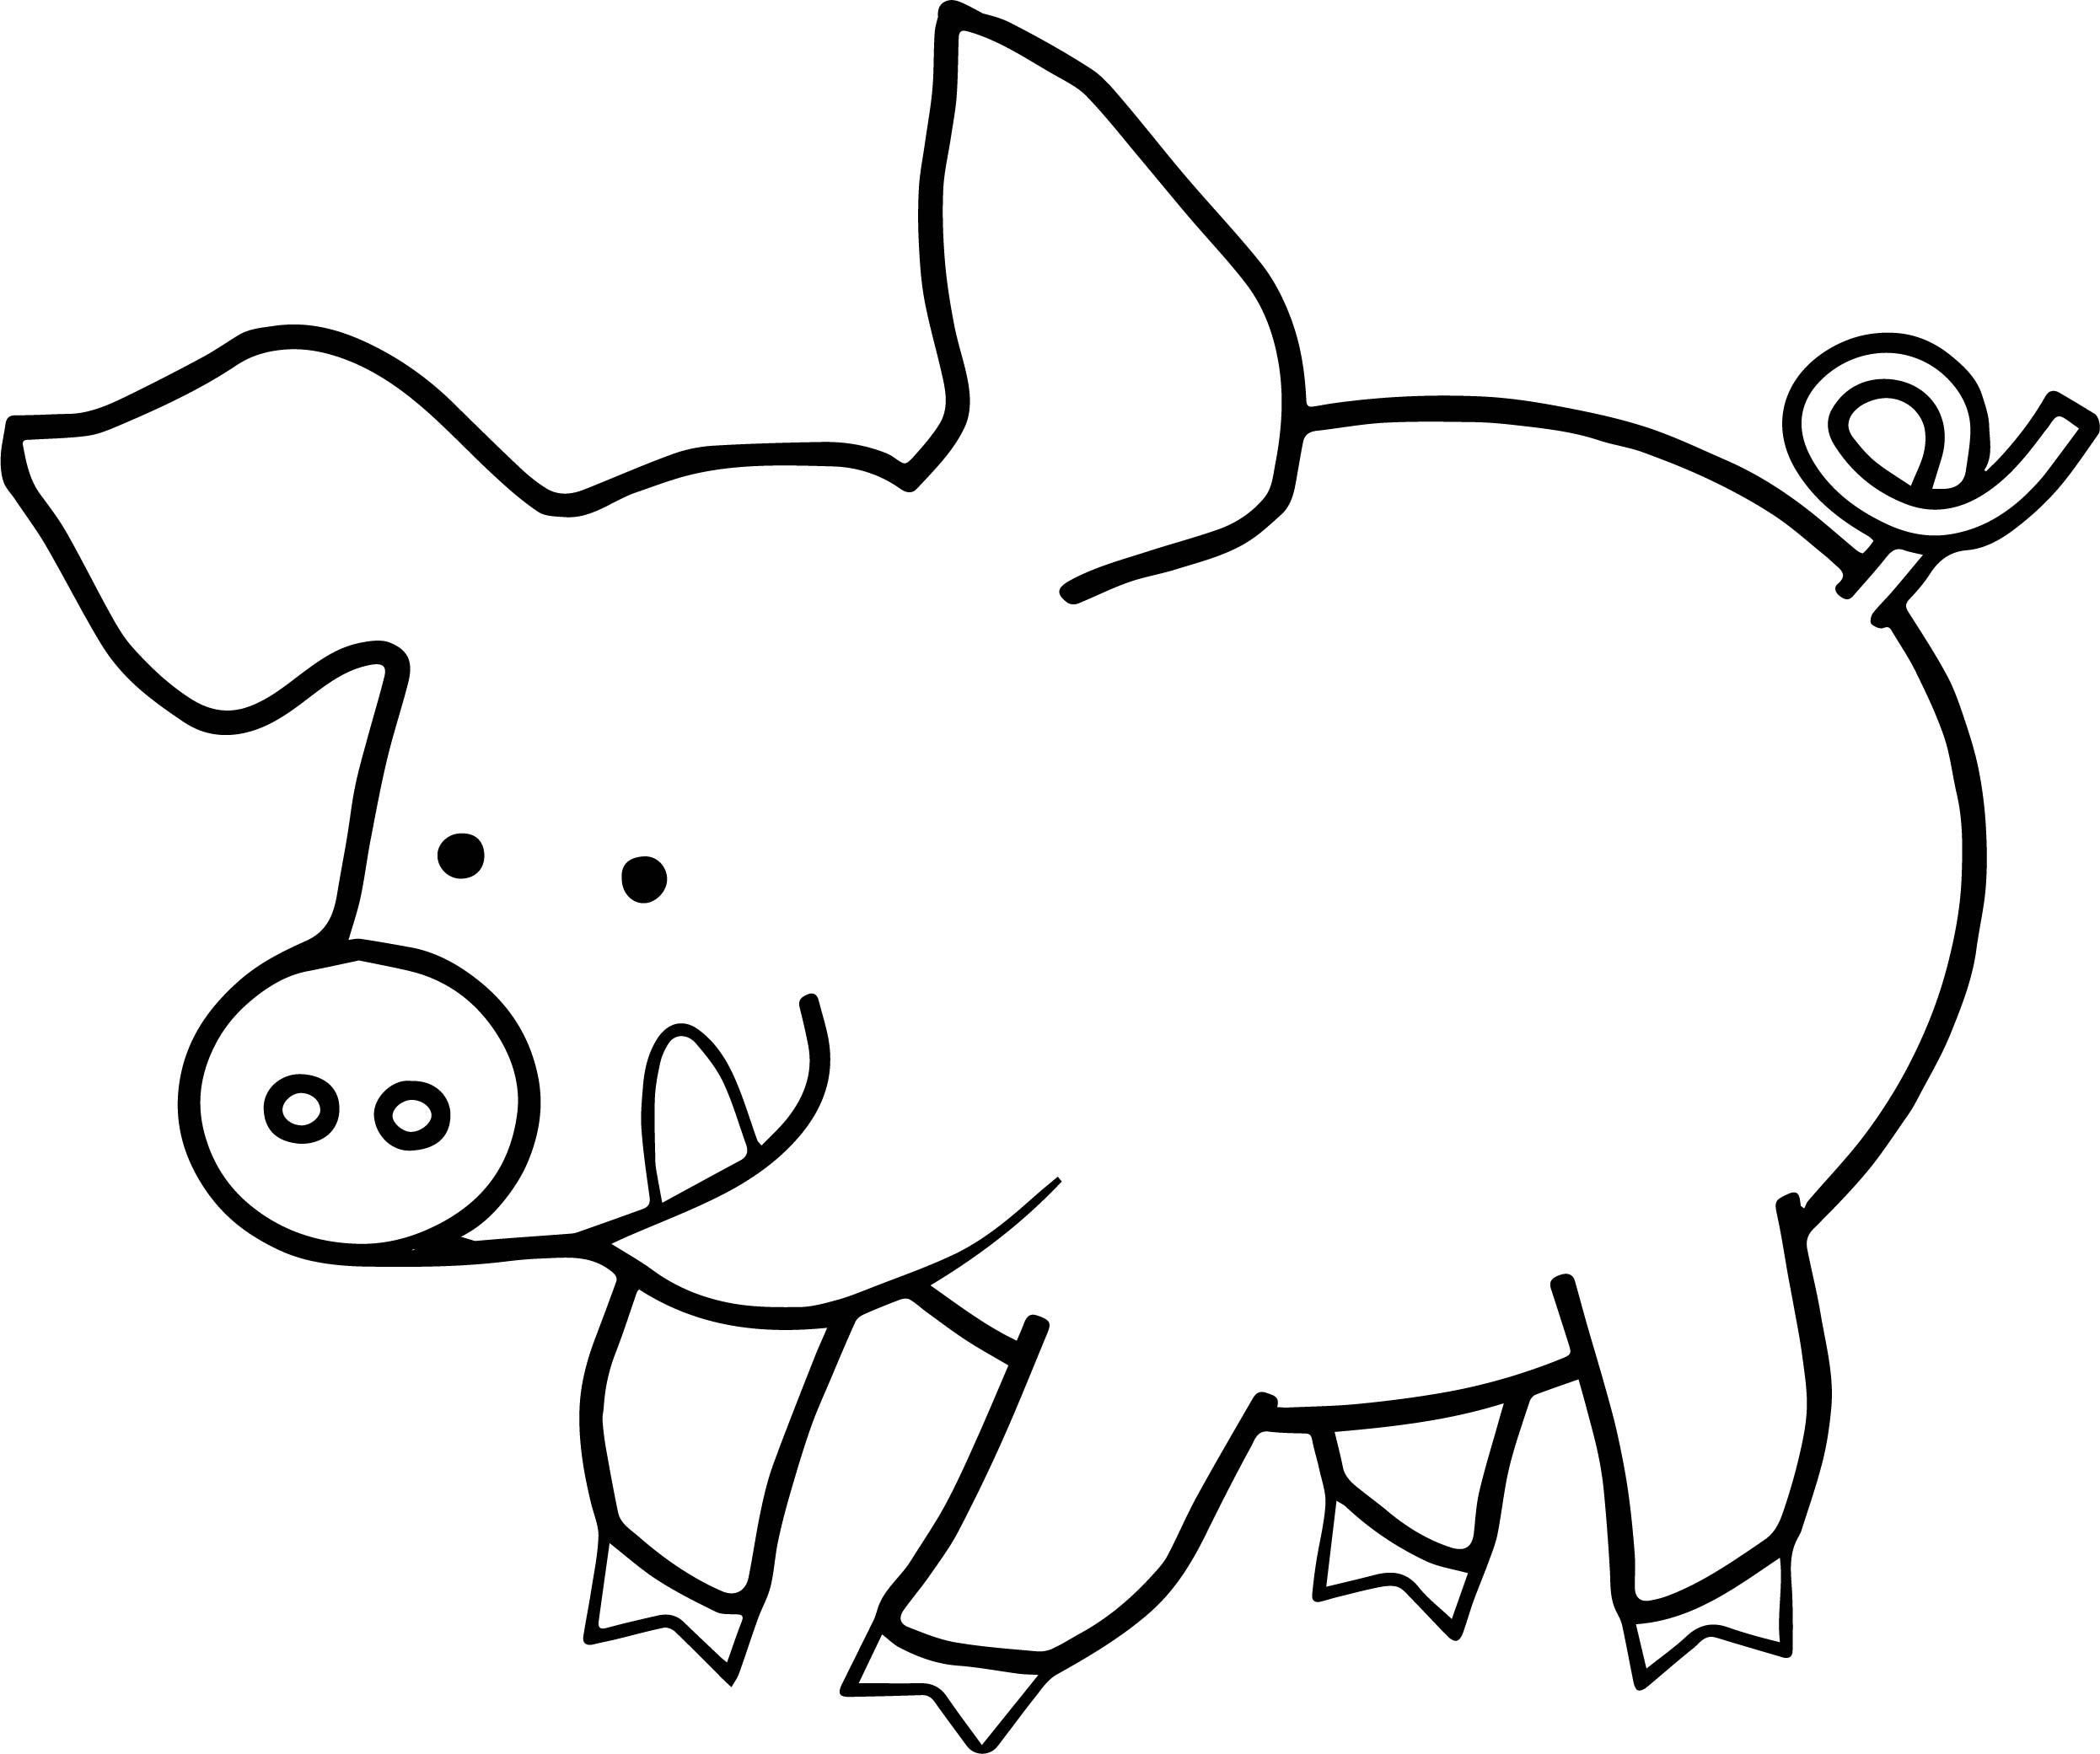 Alpha Pig Coloring Pages at Free